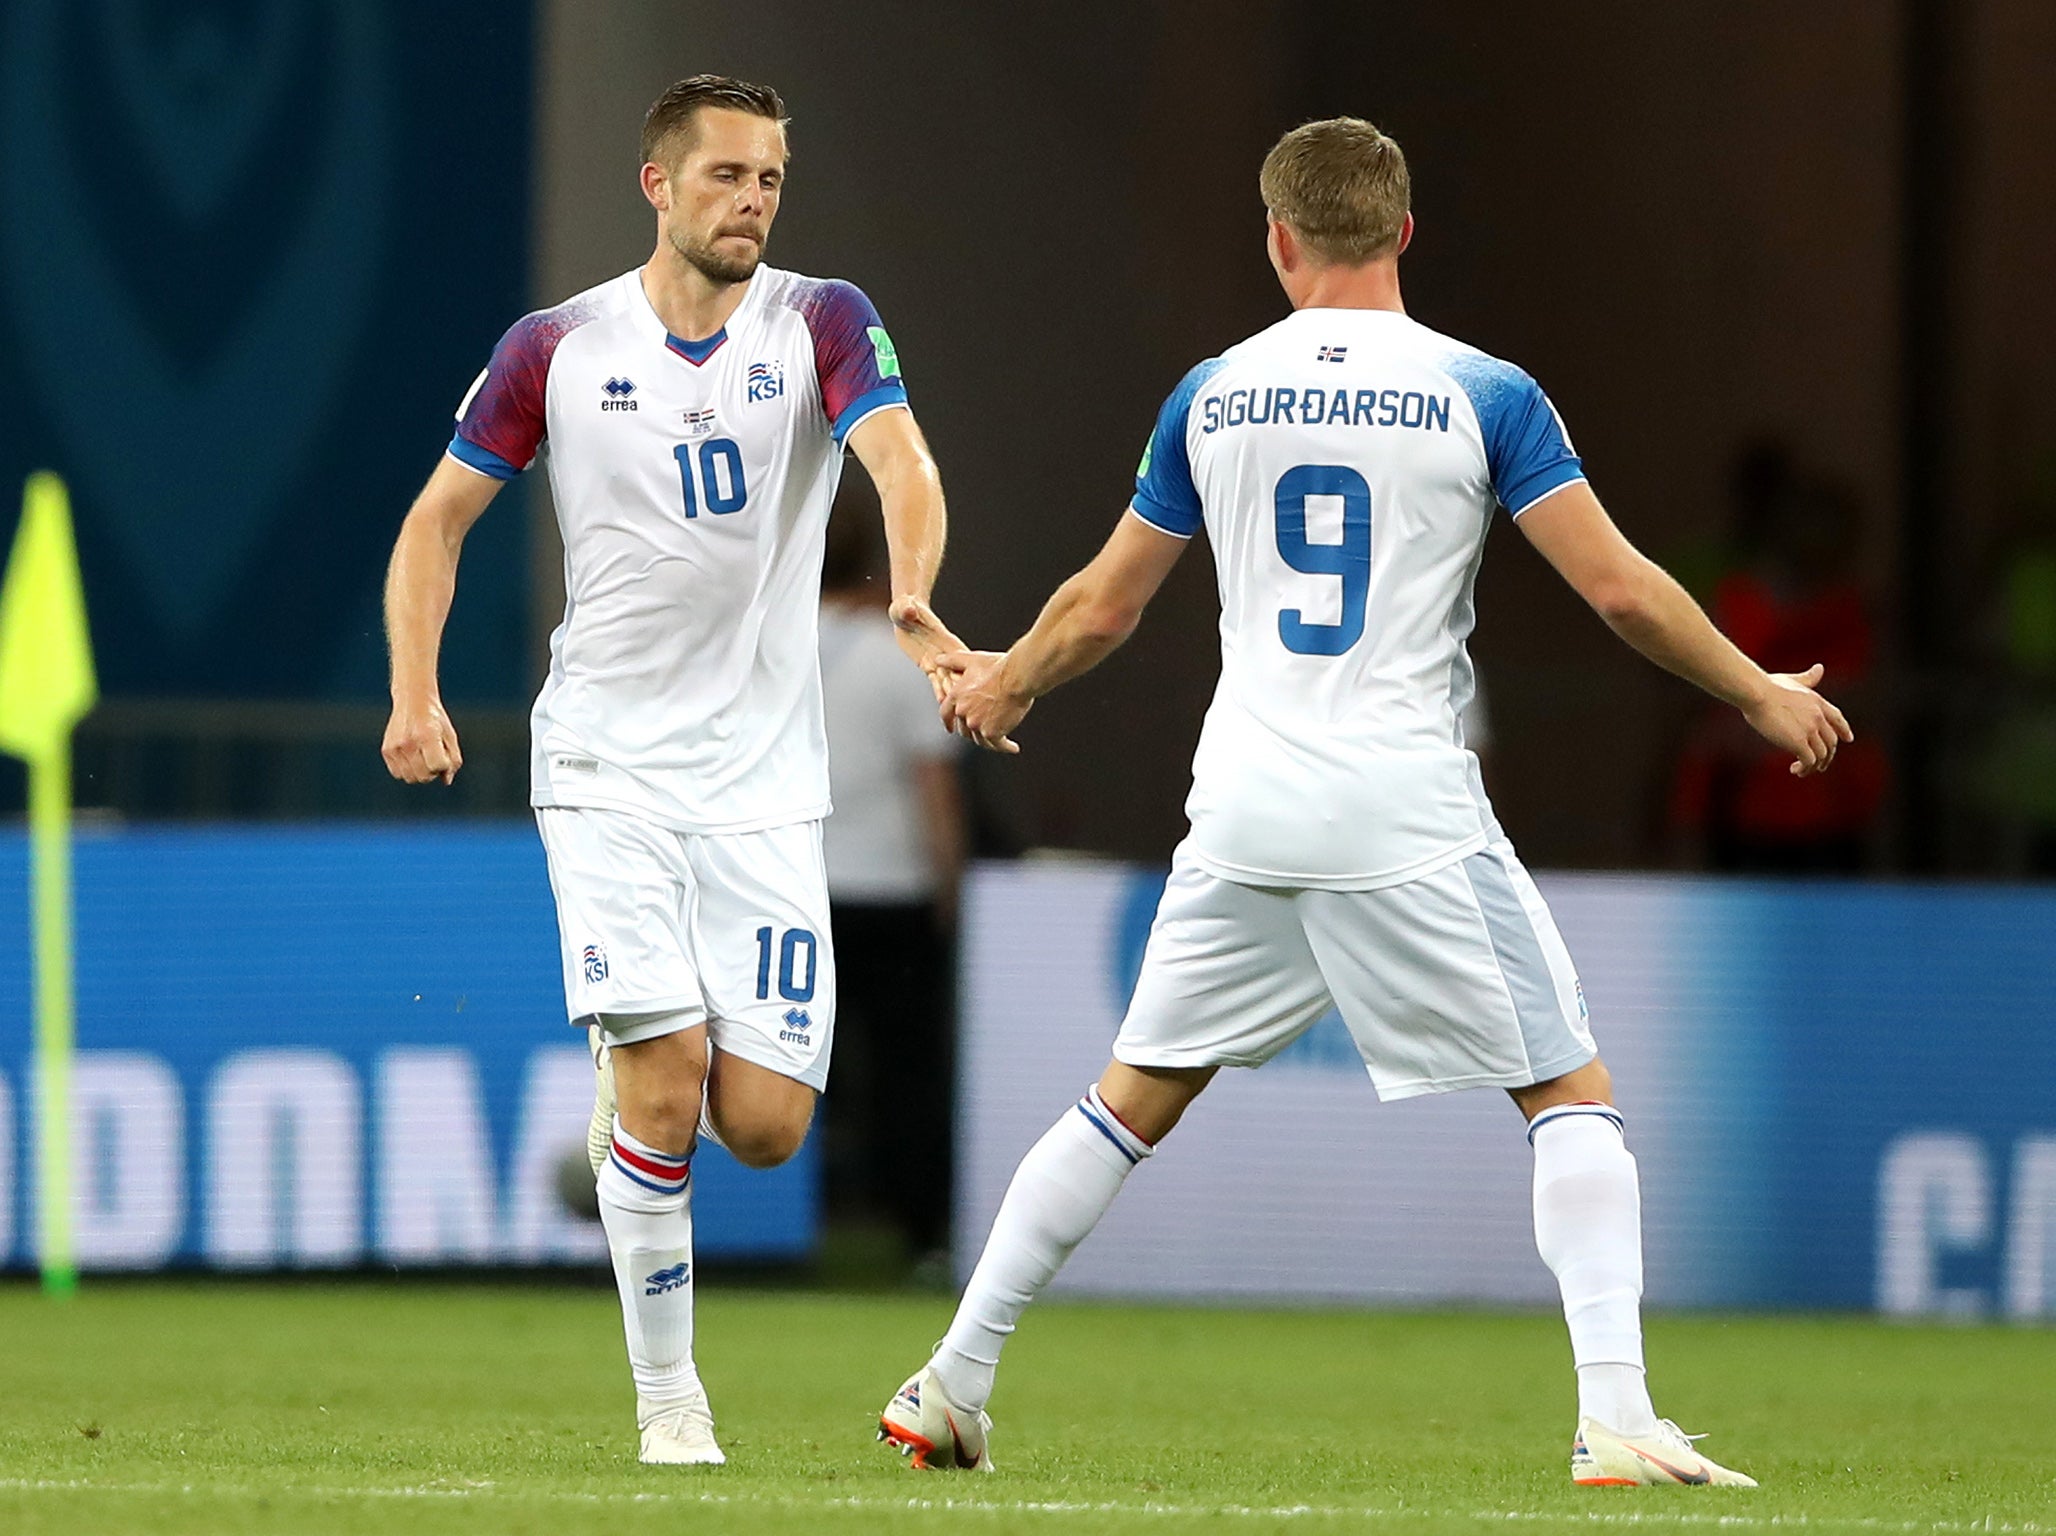 Sigurdsson gave Iceland hope with his penalty kick (Getty )